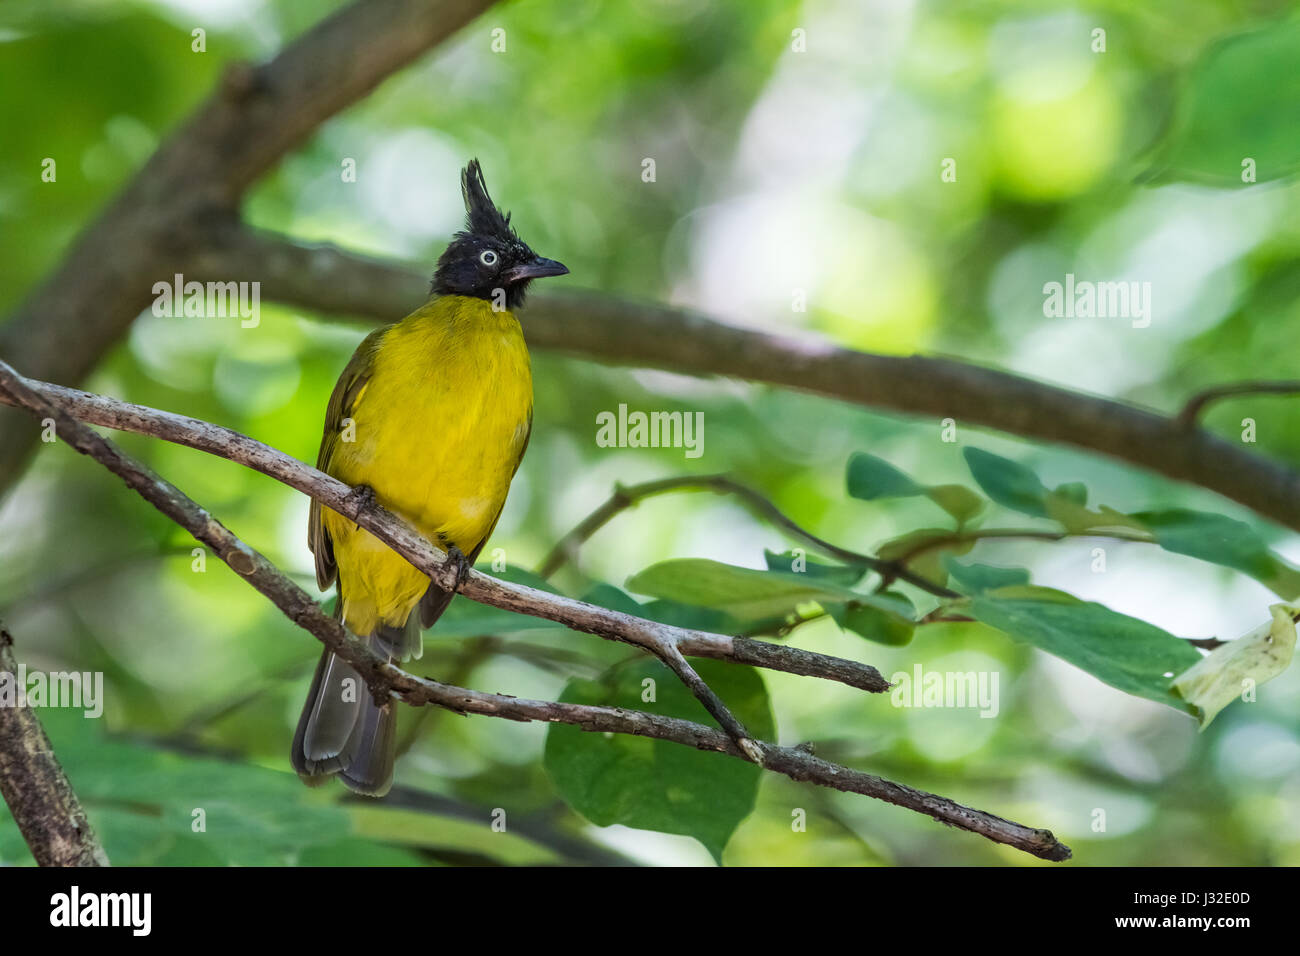 in the forest in Thailand there is a Black crested bulbul on a twig on lookout Stock Photo